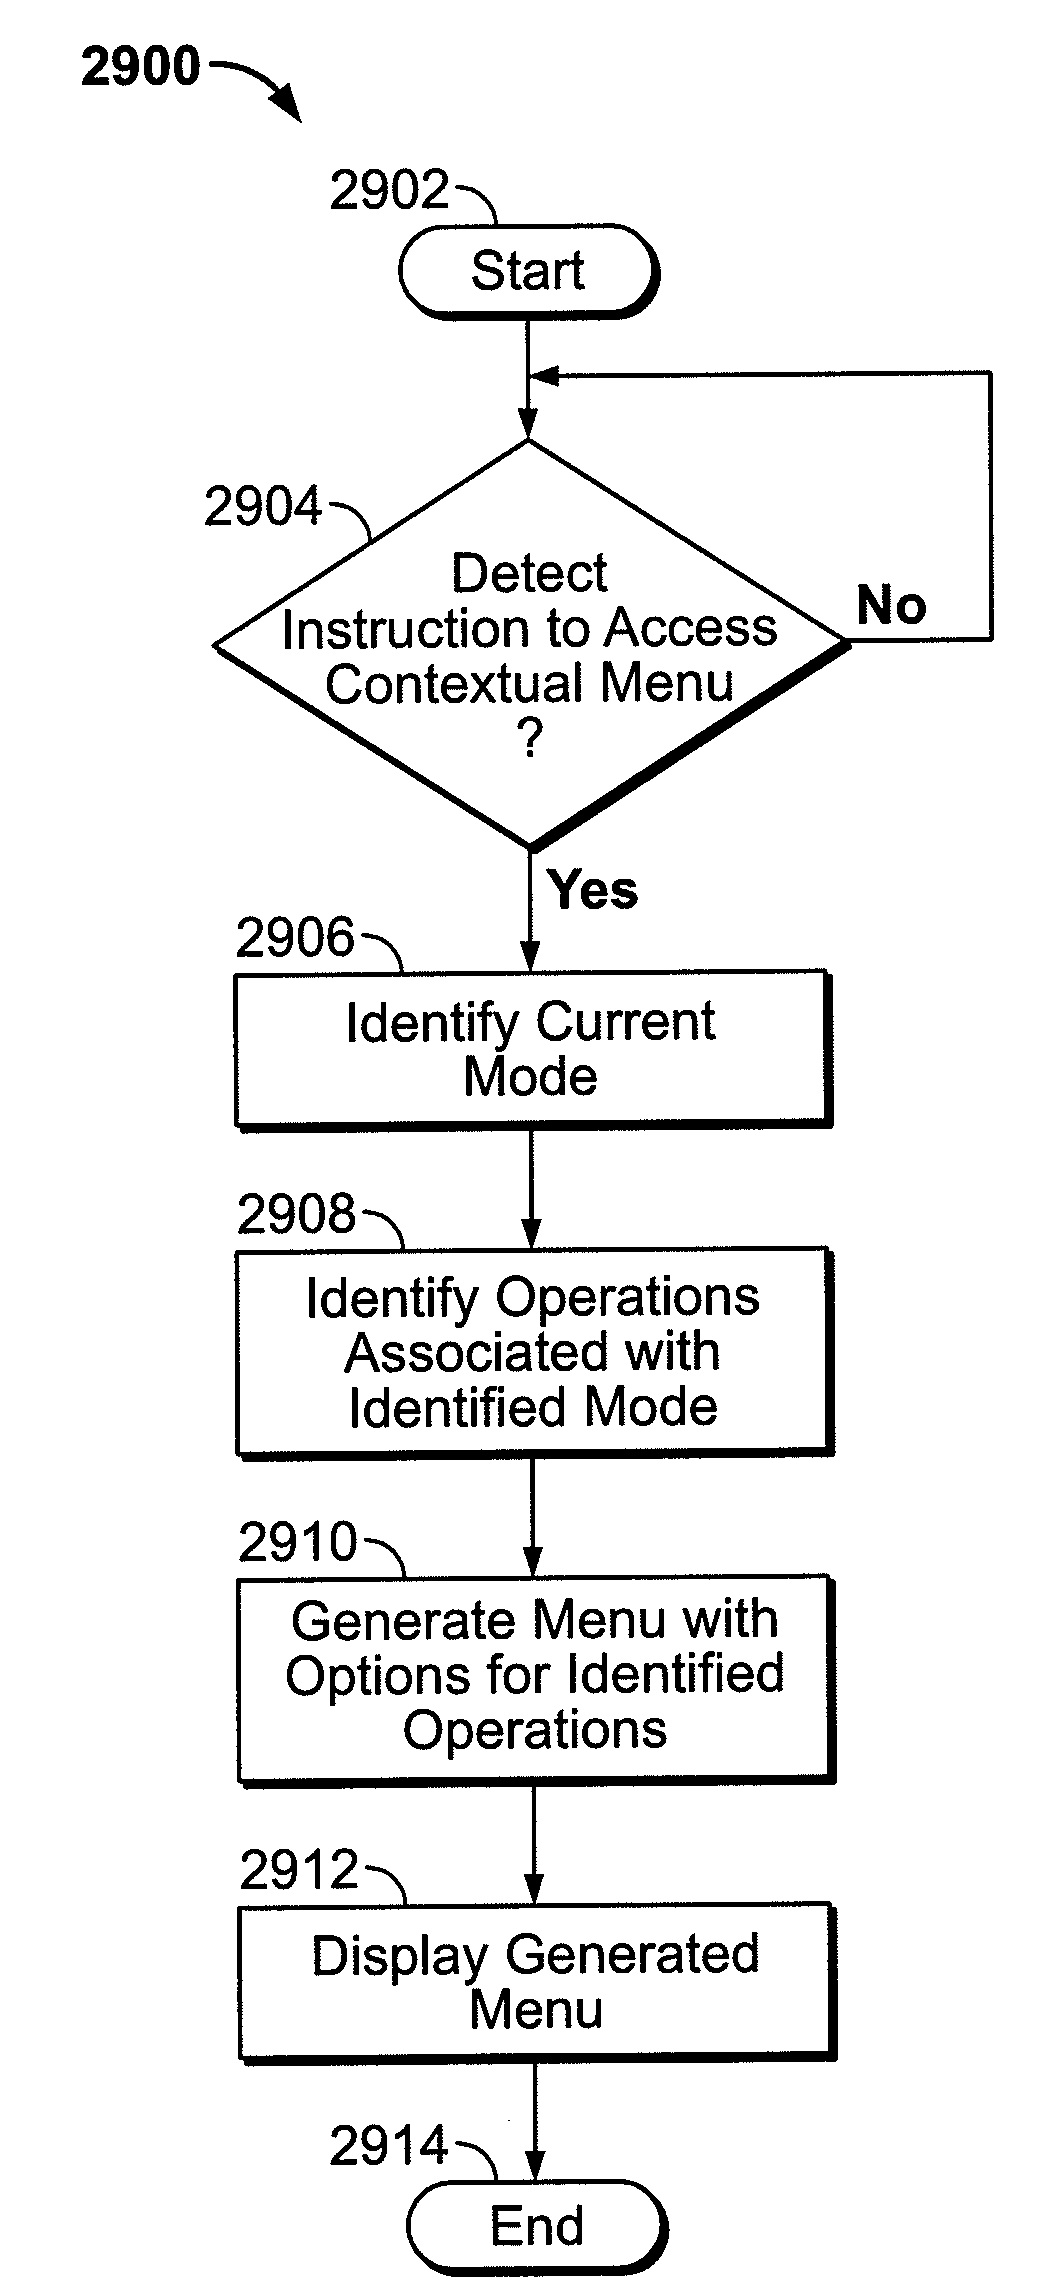 Contextual menus in an electronic device